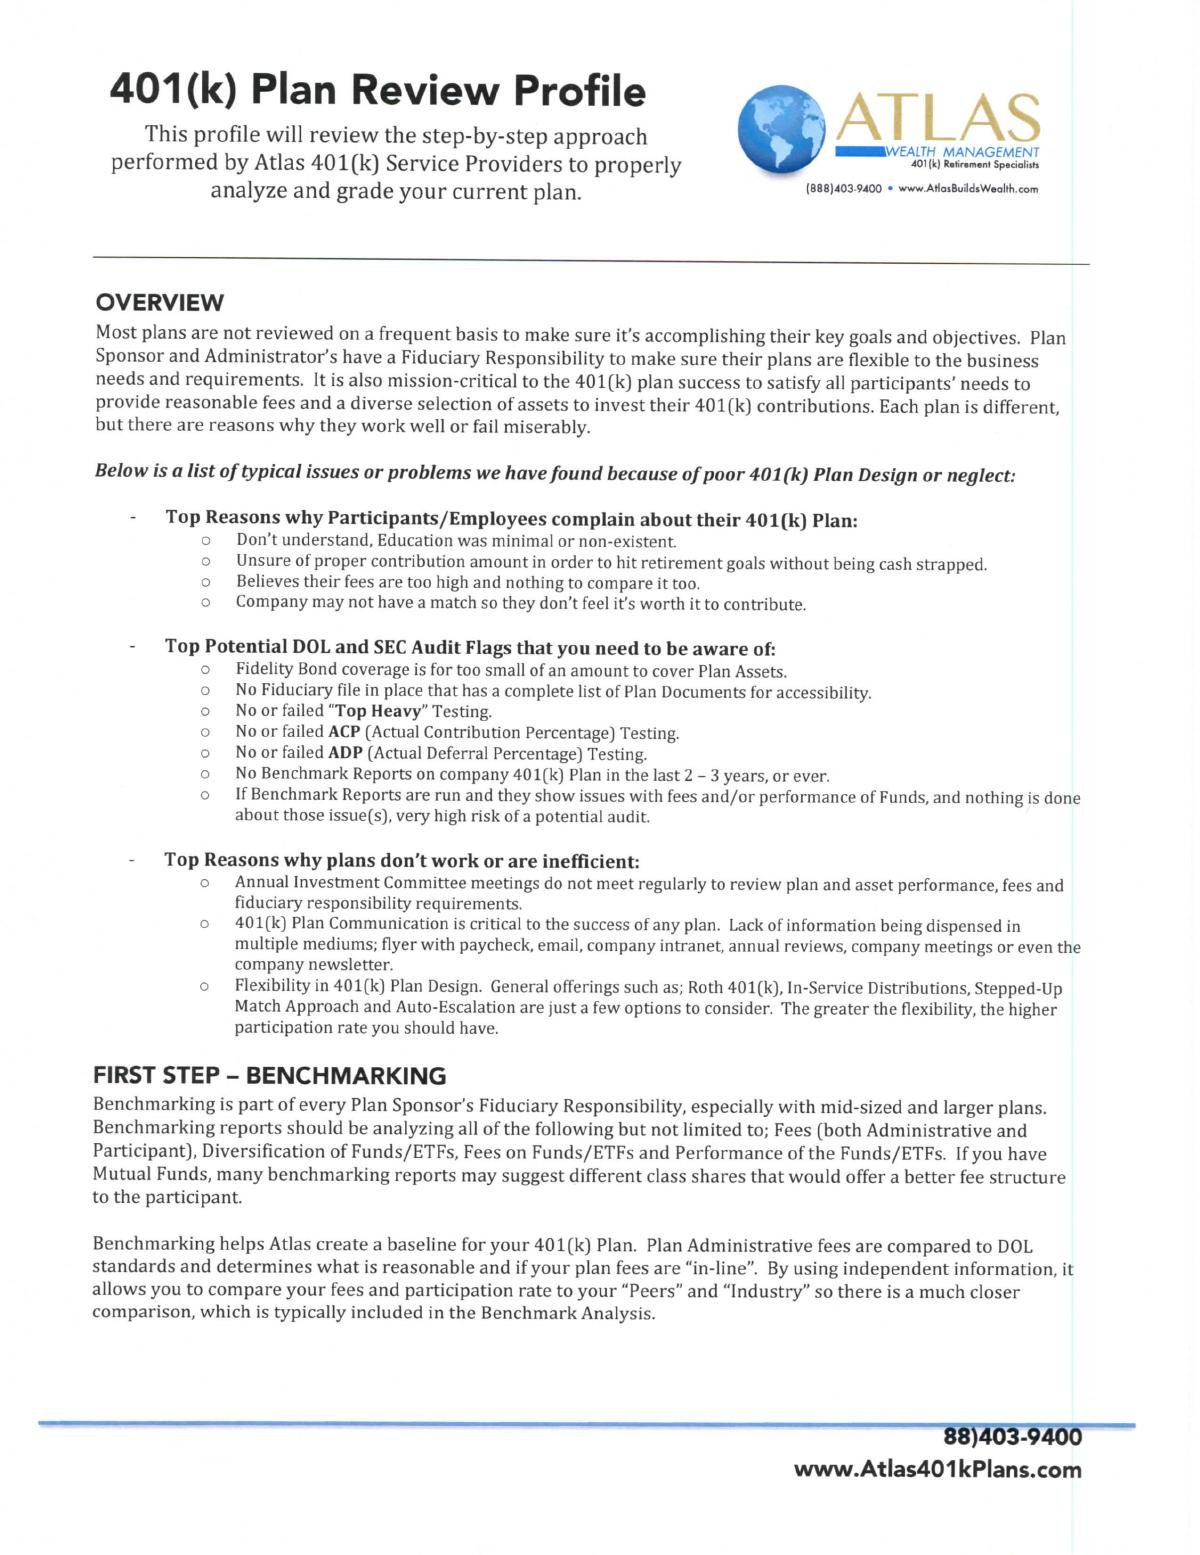 Atlas 401k Plan Review and ERISA Compliance Checklist